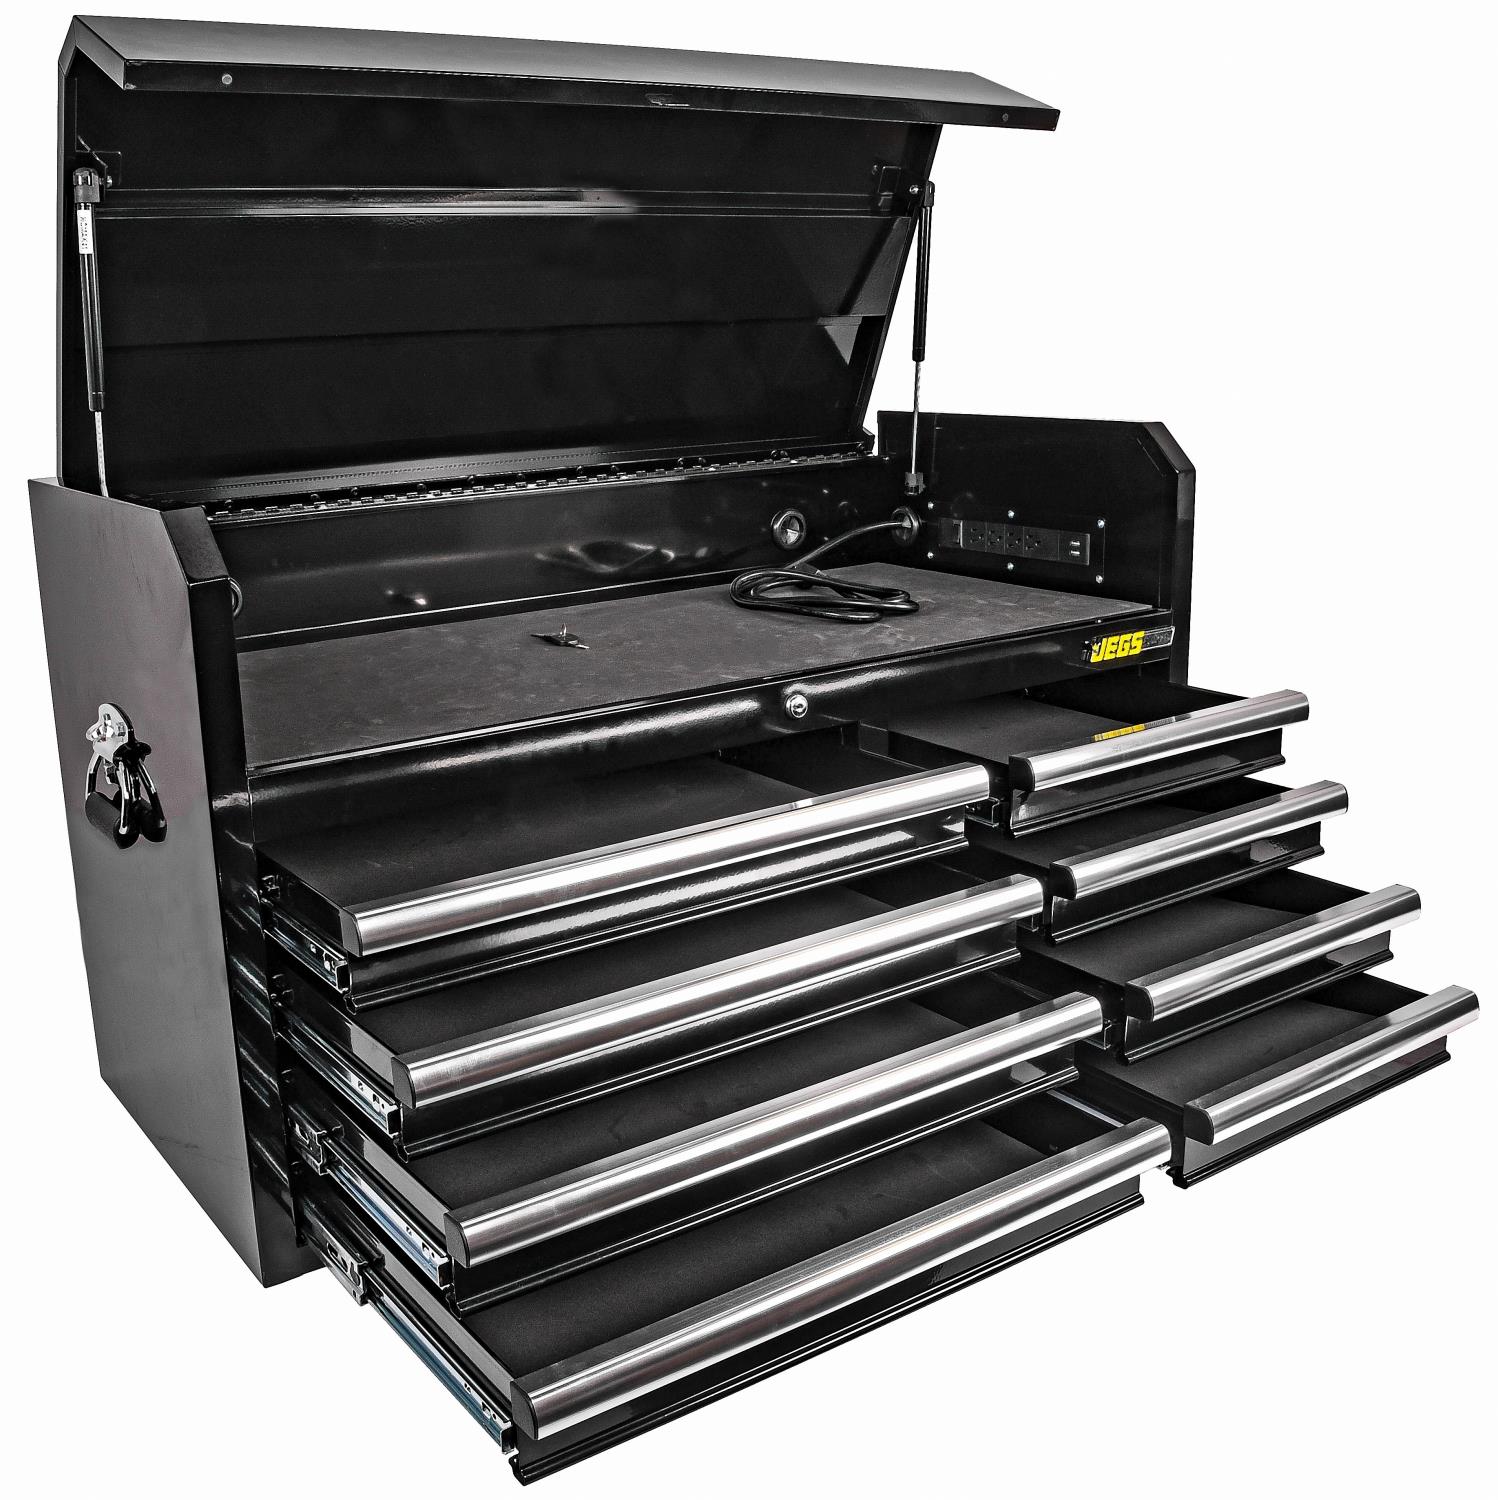 8-Drawer Steel Tool Chest [40.700 in. x 17.800 in. x 23.100 in.]